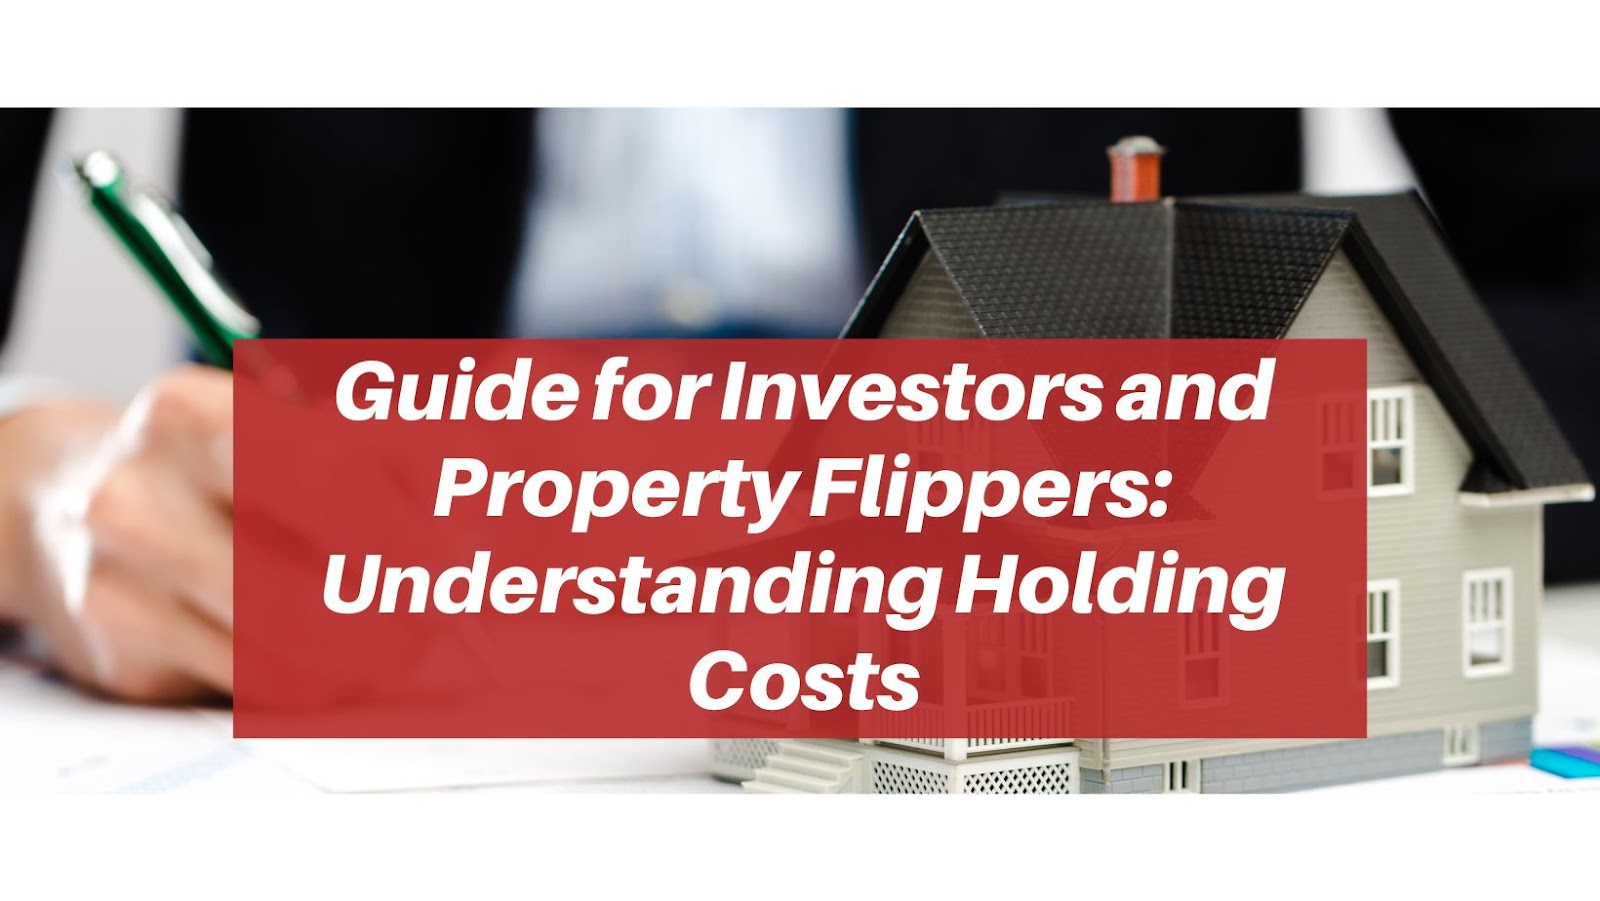 By using the holding cost checklist provided in this guide, you can ensure that you’re factoring in all of the holding costs associated with your property.
